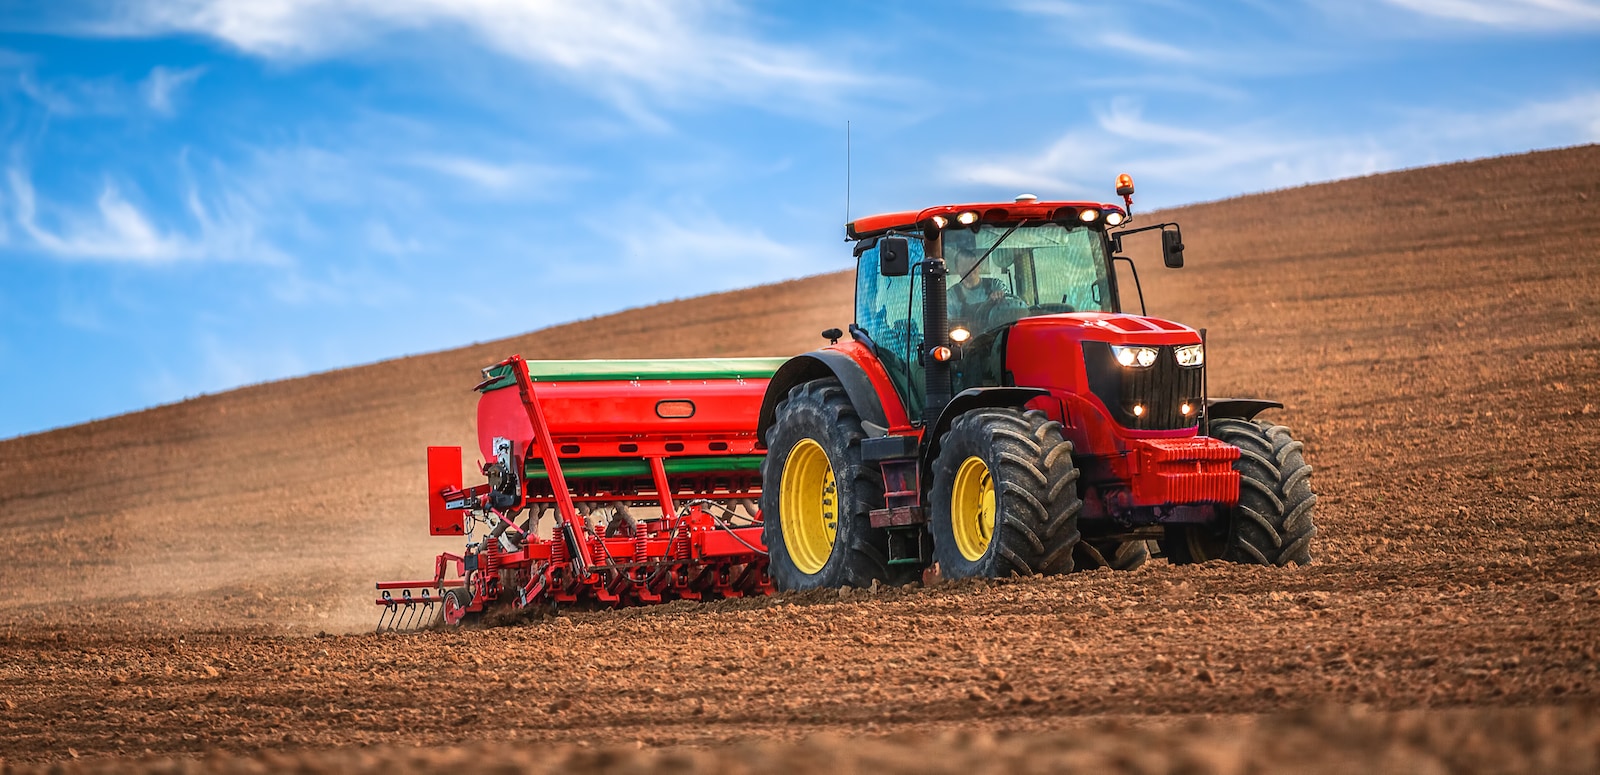 Shell Rotella SuperTractors – People's Choice